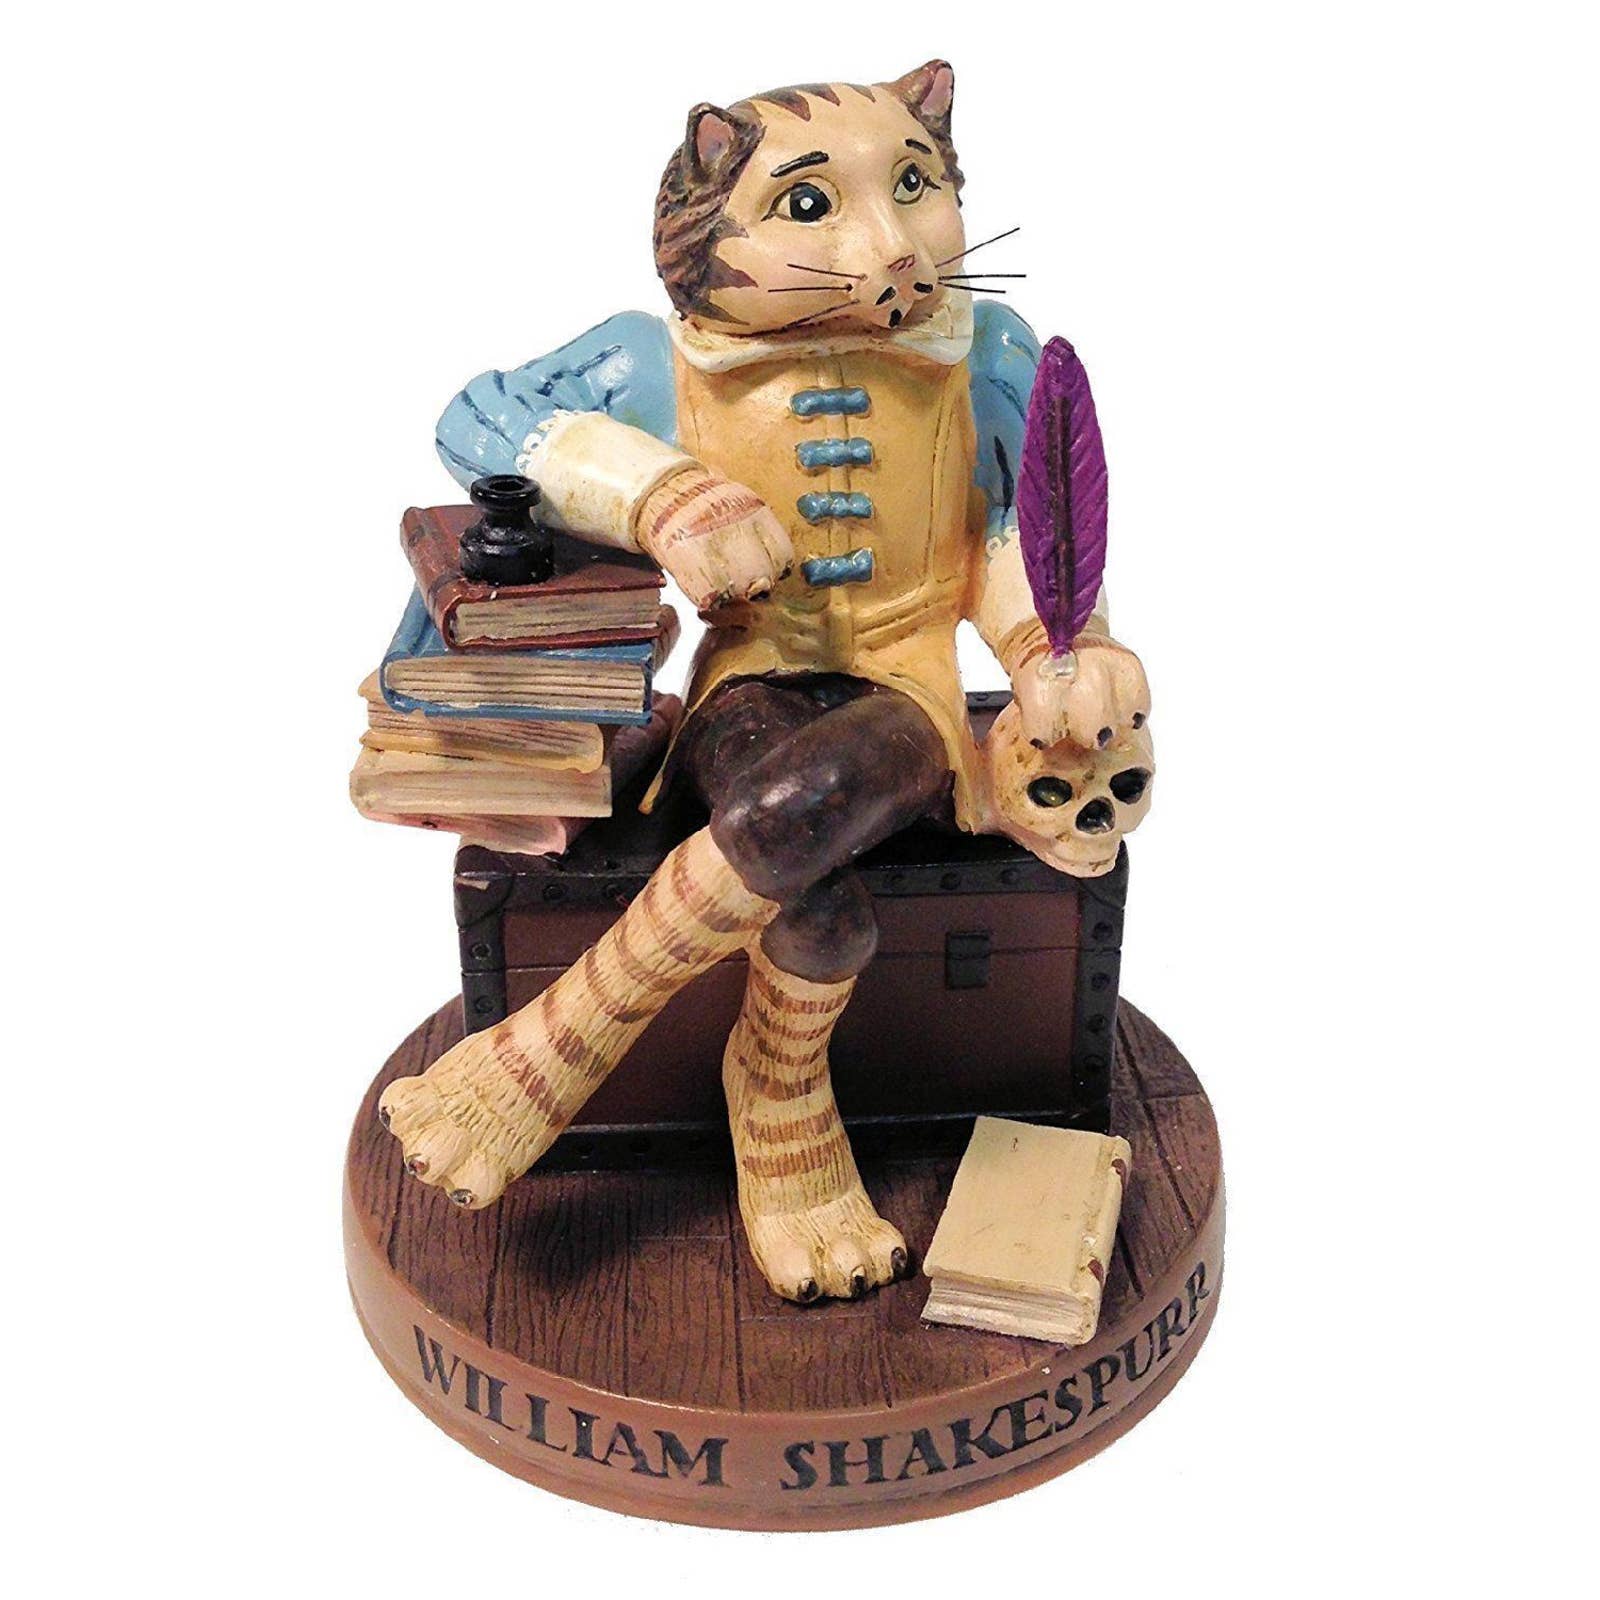 Ertl William Shakespurr Figurine Cat Hall of Fame Collectible Kitty Collector 4"